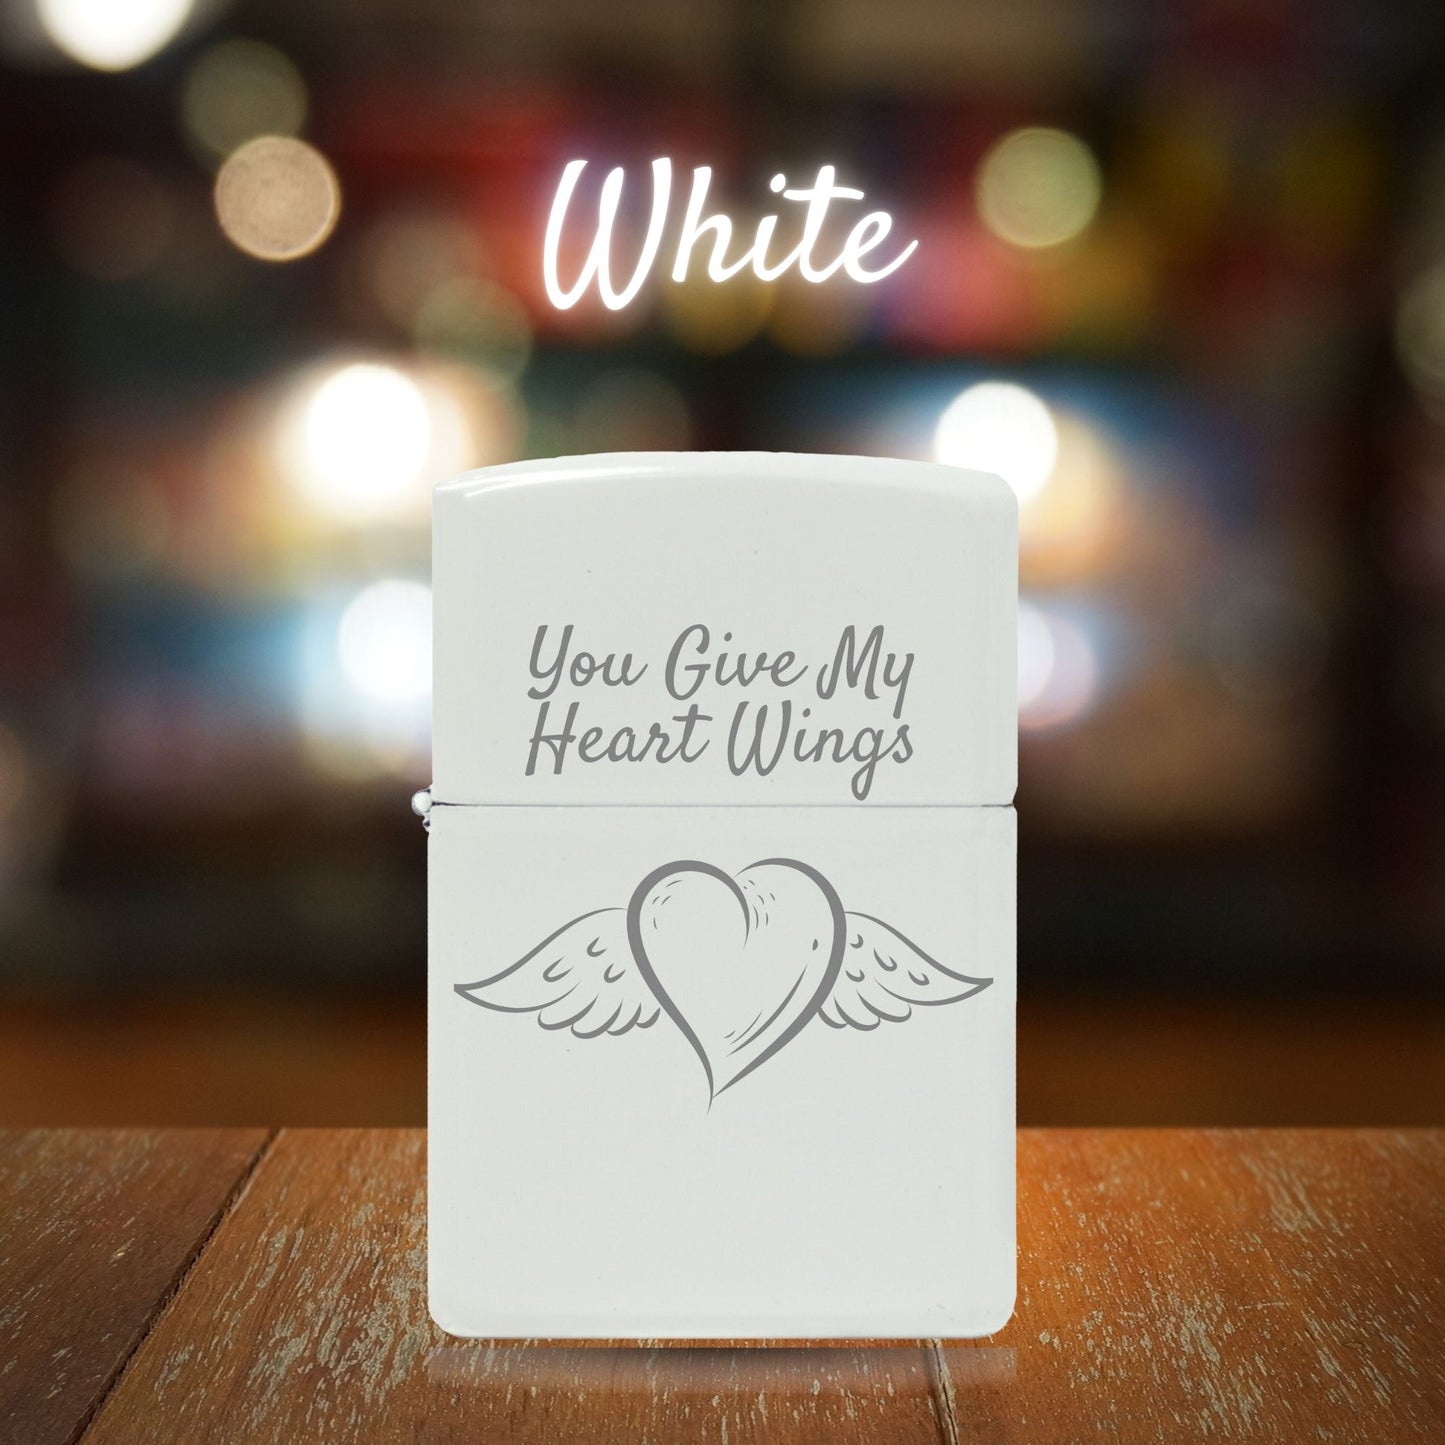 Lighter Lovers. Quality Customized Lighters "You Give My Heart Wings" Design, Available In Black White And Polished Metal